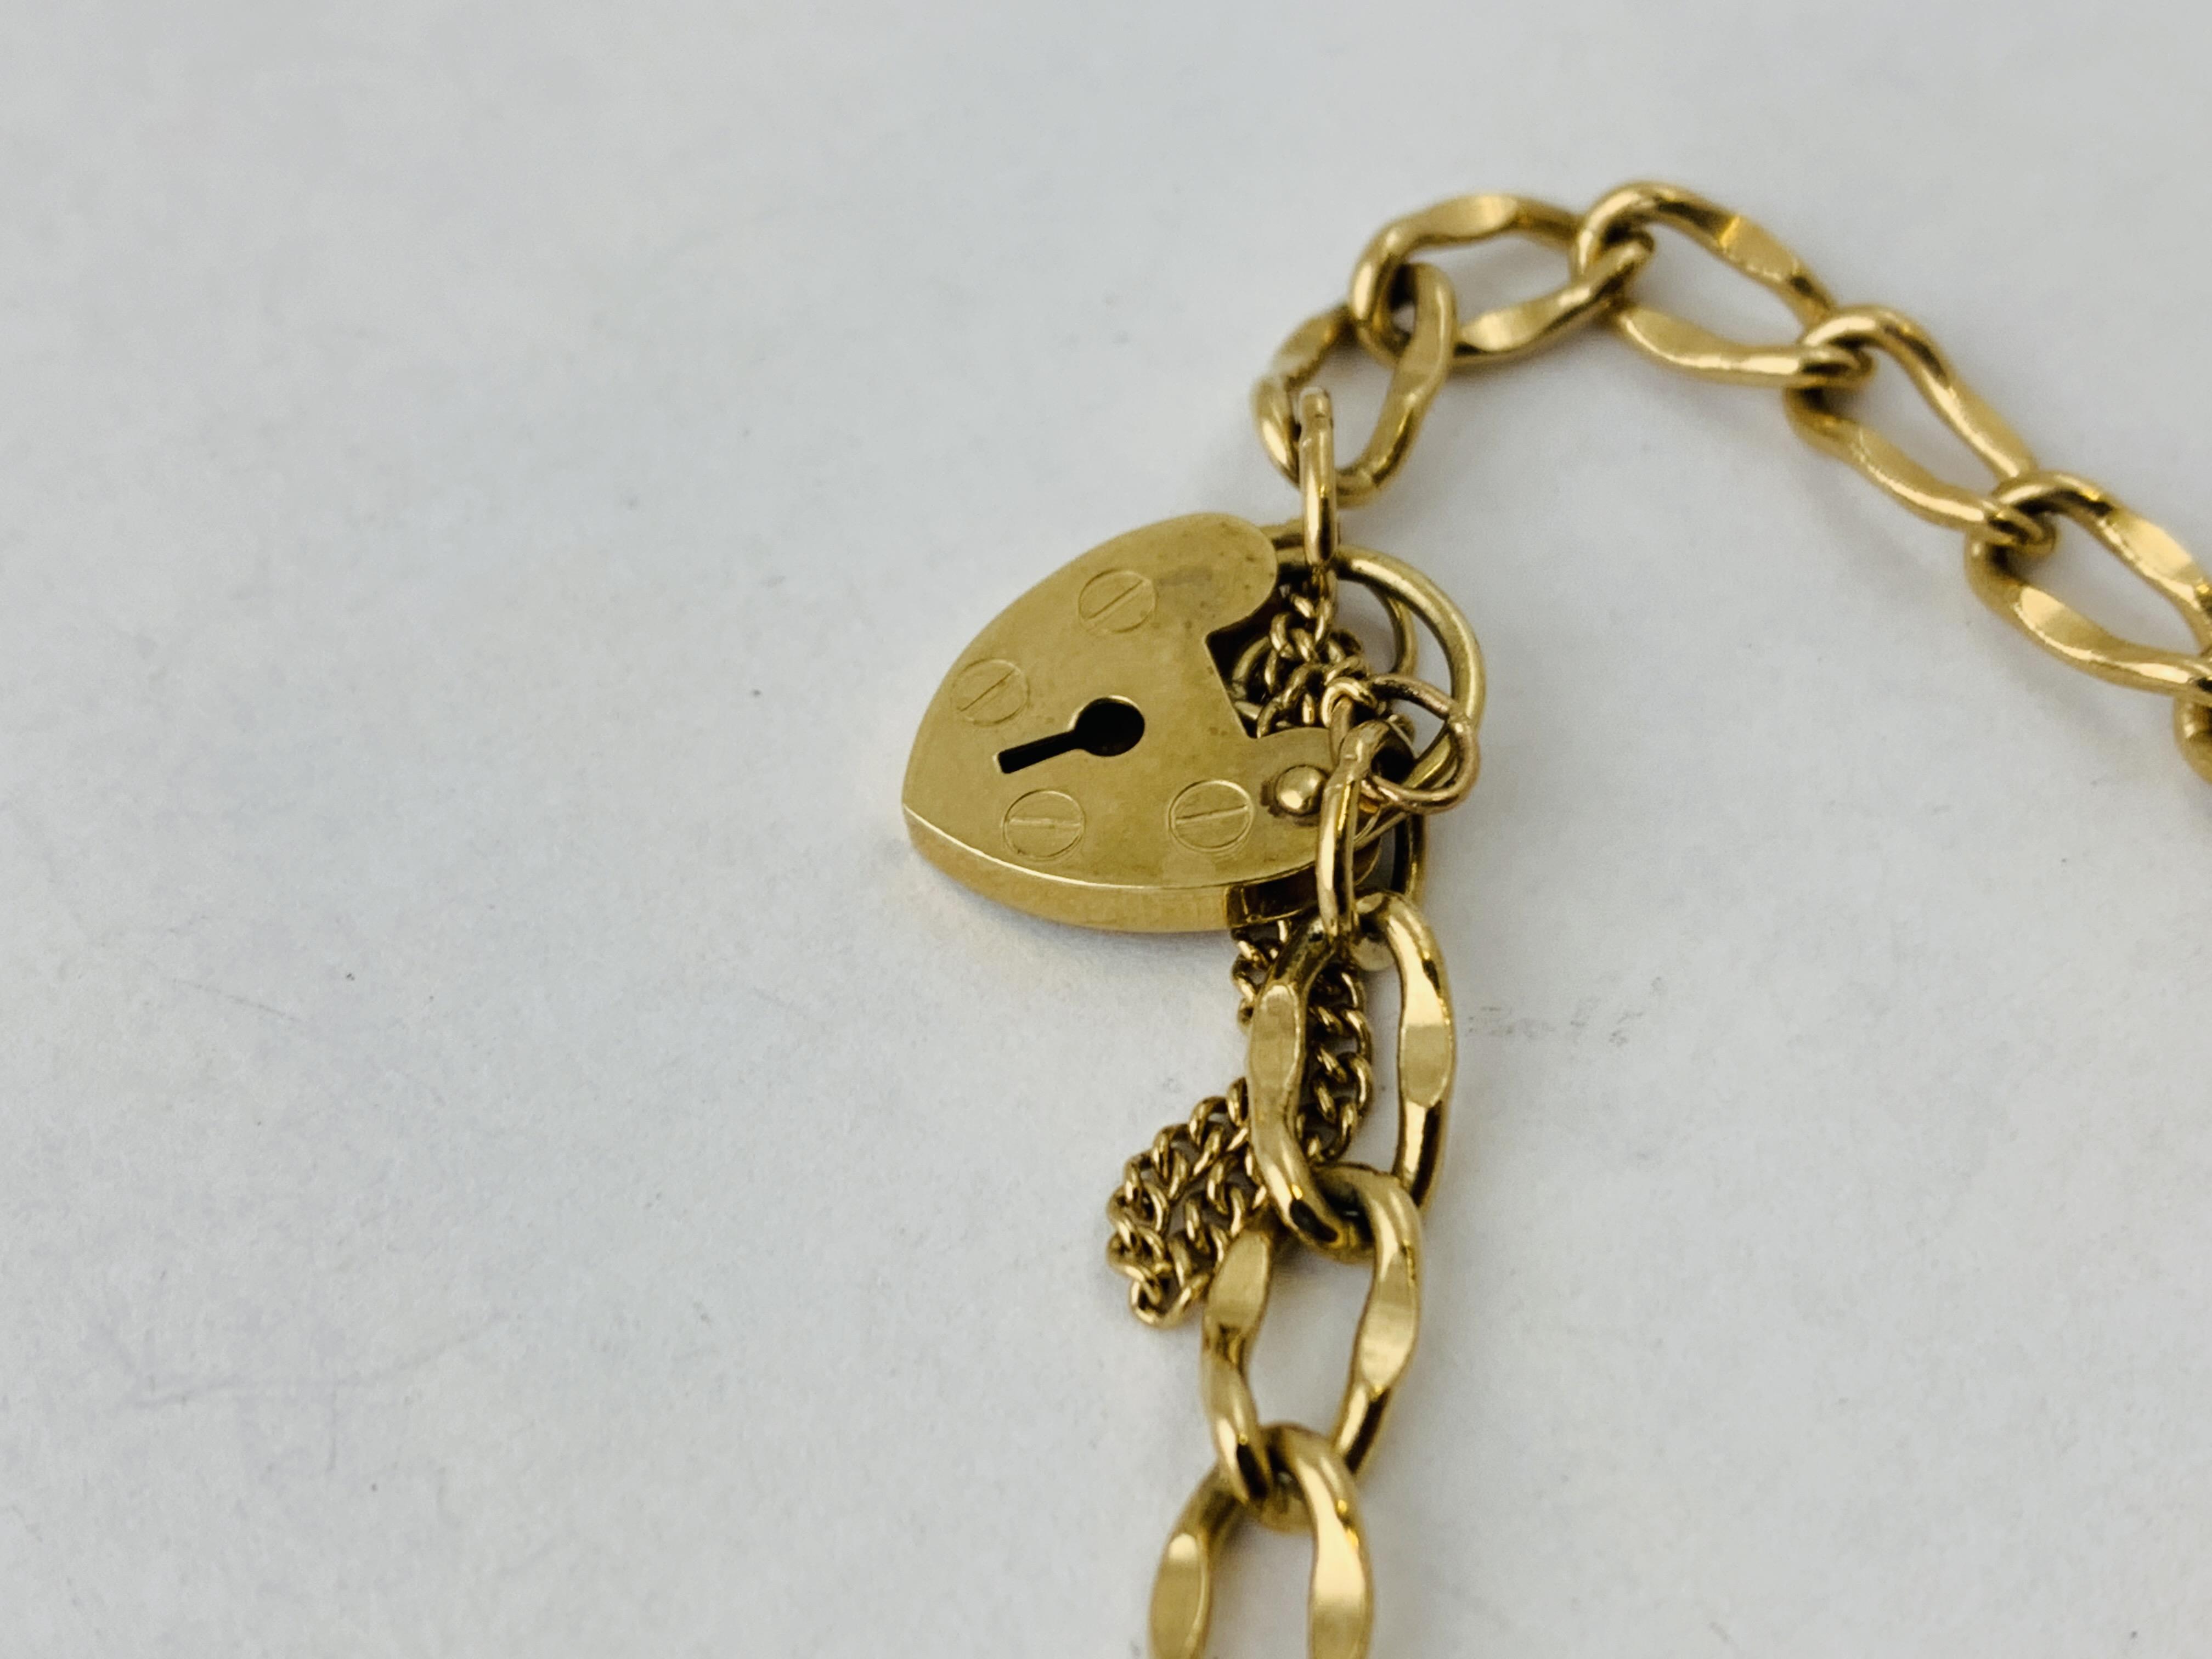 A 9CT GOLD BRACELET WITH HEART SHAPED PADLOCK CLASP AND YELLOW STONE SET PENDANT ATTACHED L 200MM - Image 7 of 9